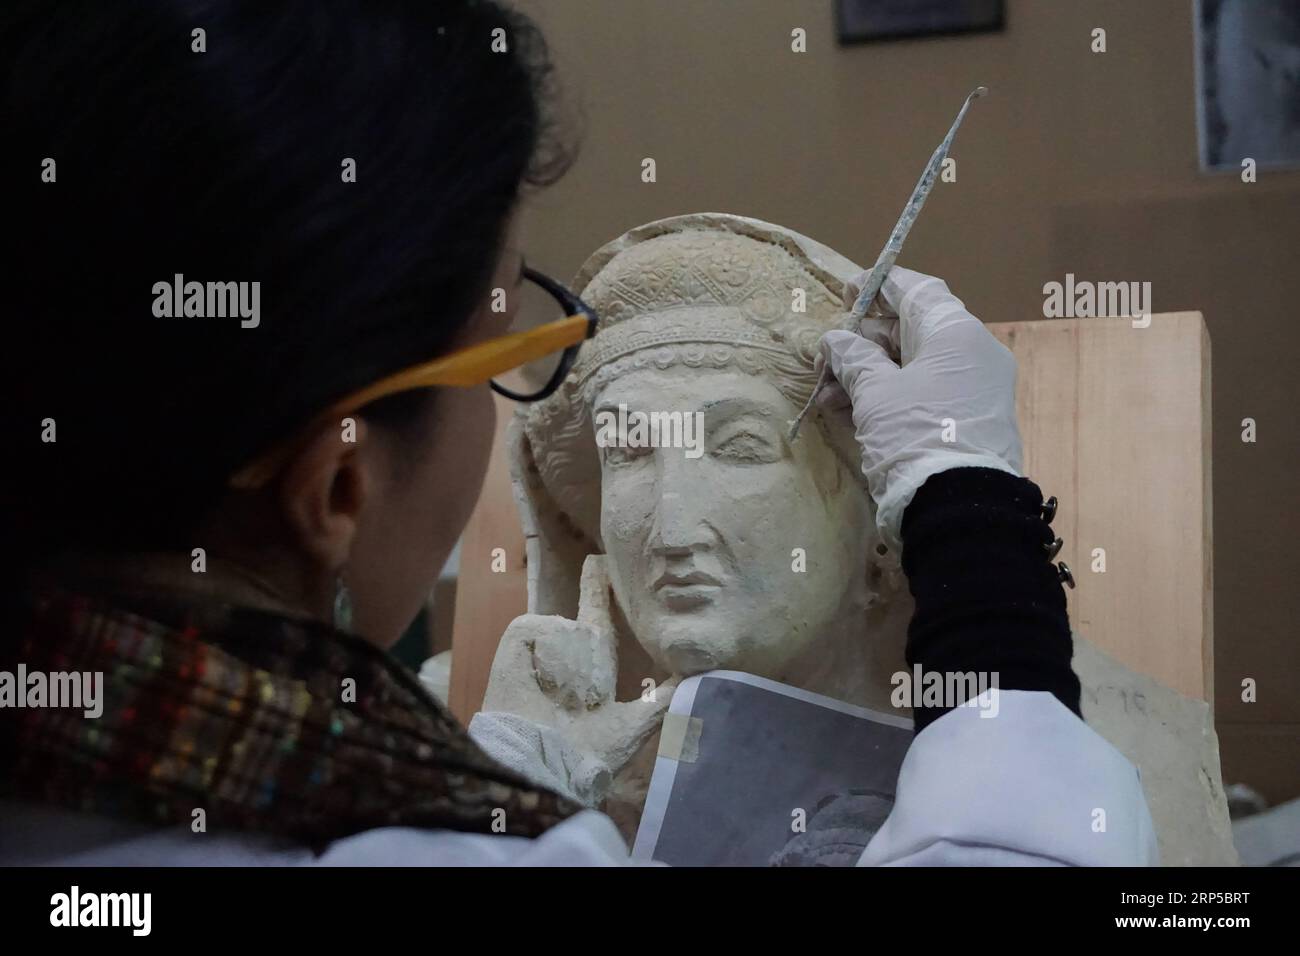 (181207) -- DAMASCUS, Dec. 7, 2018 -- Heba Jouma, a conservator-restorer from the ancient city of Palmyra in Syria and a member of a Syrian restoration experts team, works at the National Museum of Damascus in Damascus, Syria, on Dec. 5, 2018. Heba Jouma works to bring back ancient features to the sculptures damaged by the Islamic State (IS) group. The IS group had stormed Palmyra twice during the more than seven-year-long war, destroying precious archeological sites, such as temples and tombs, and shattering sculptures into pieces in the ancient oasis city, which is registered by the UNESCO a Stock Photo